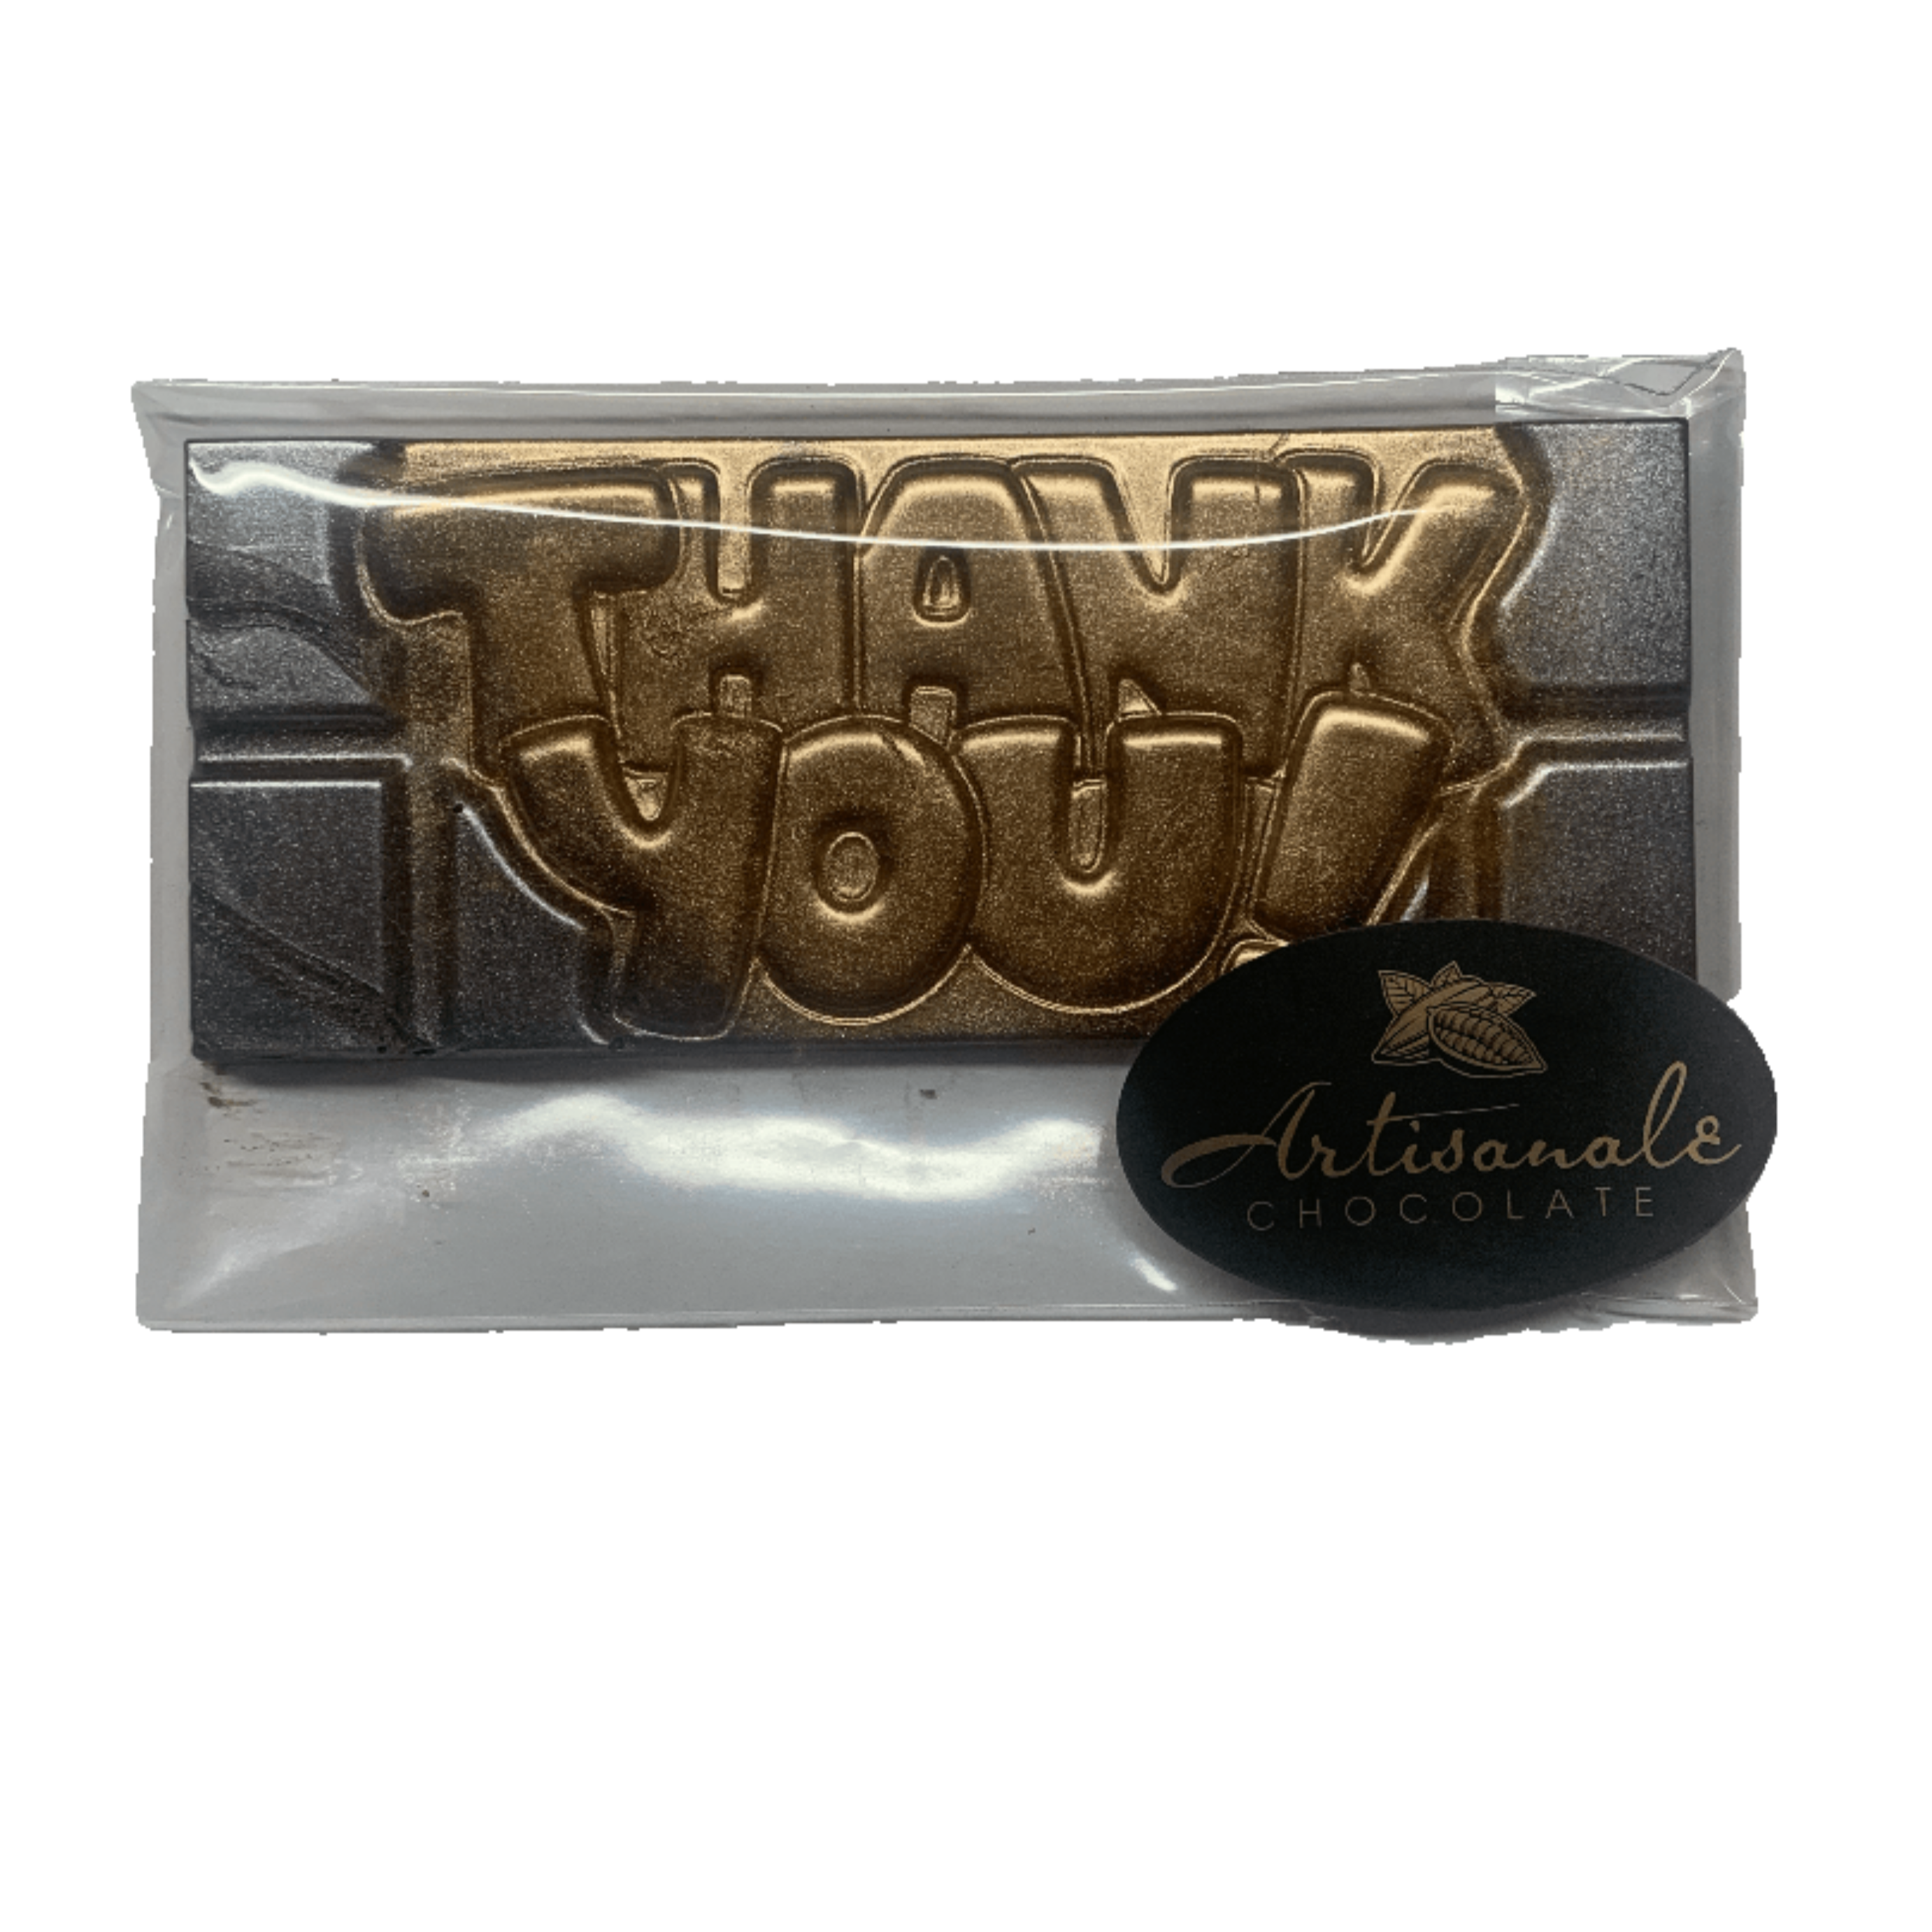 Say_Thank_You_Wrapped-min.png